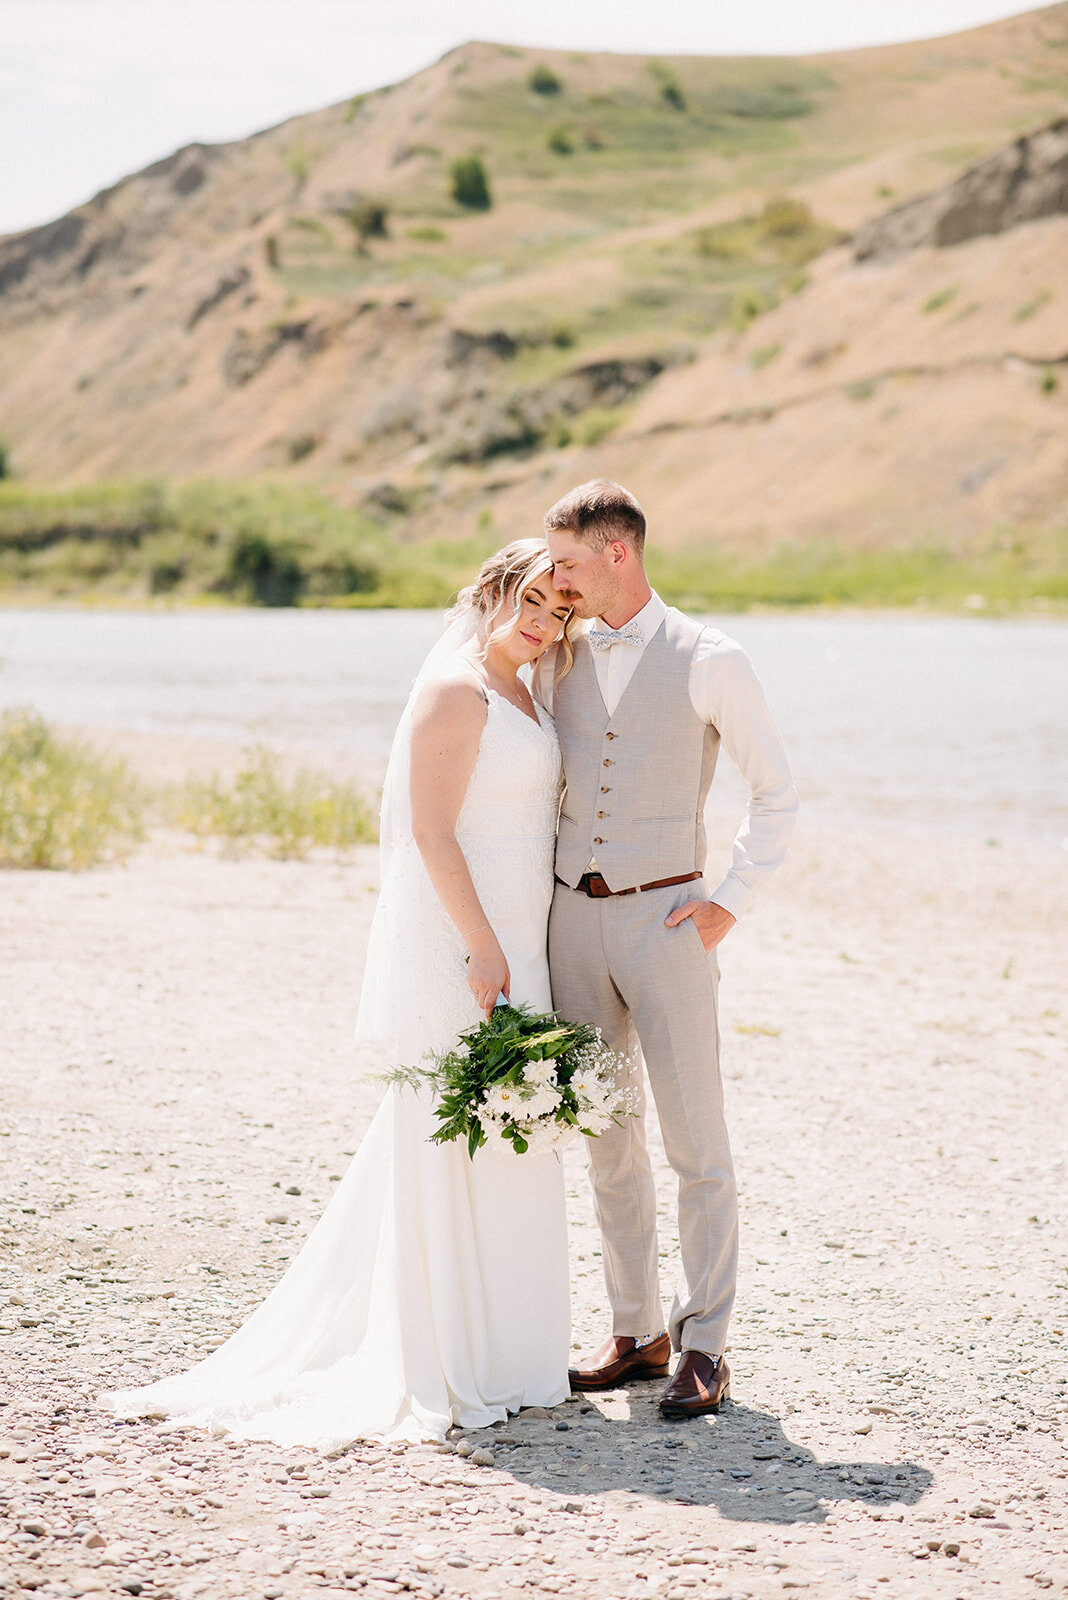 Bride and groom embracing, captured by Kristin Sarah Photography. Featured on the Bronte Bride Vendor Guide.